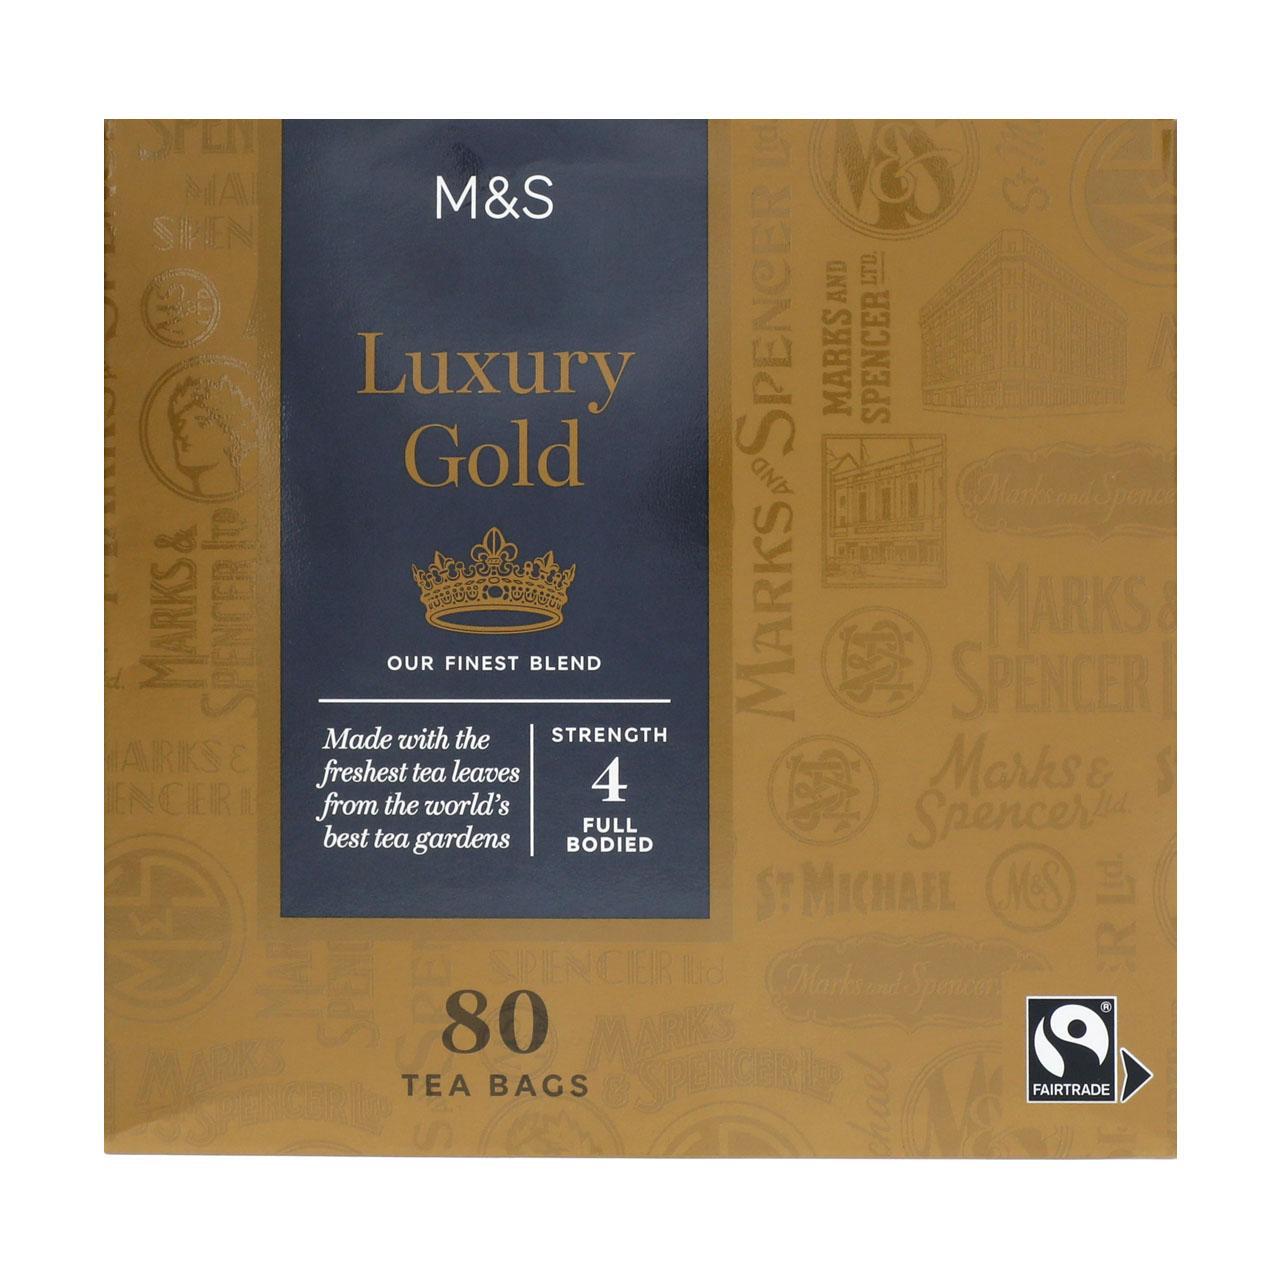 M&S Fairtrade Luxury Gold Teabags 80 per pack